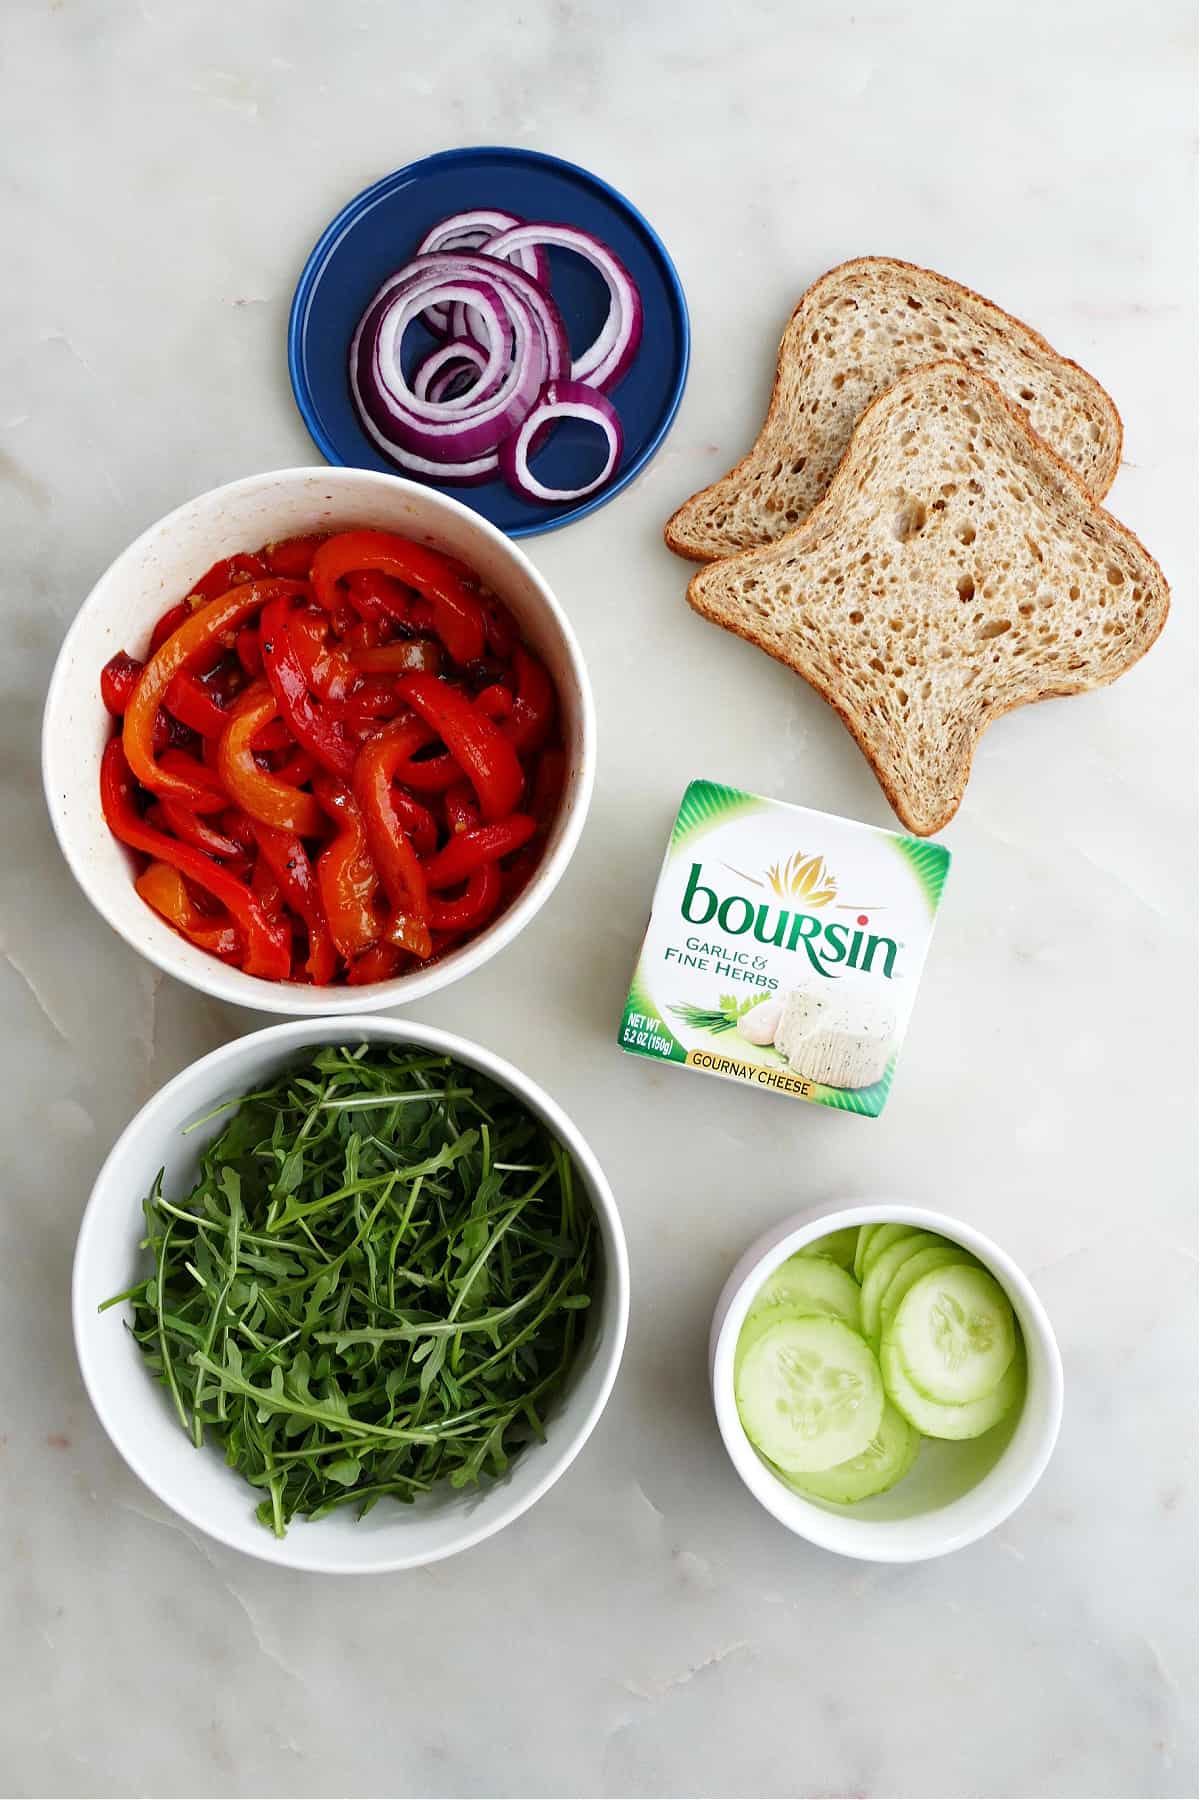 red onion, red peppers, arugula, cucumber, Boursin cheese, and sliced bread on a counter